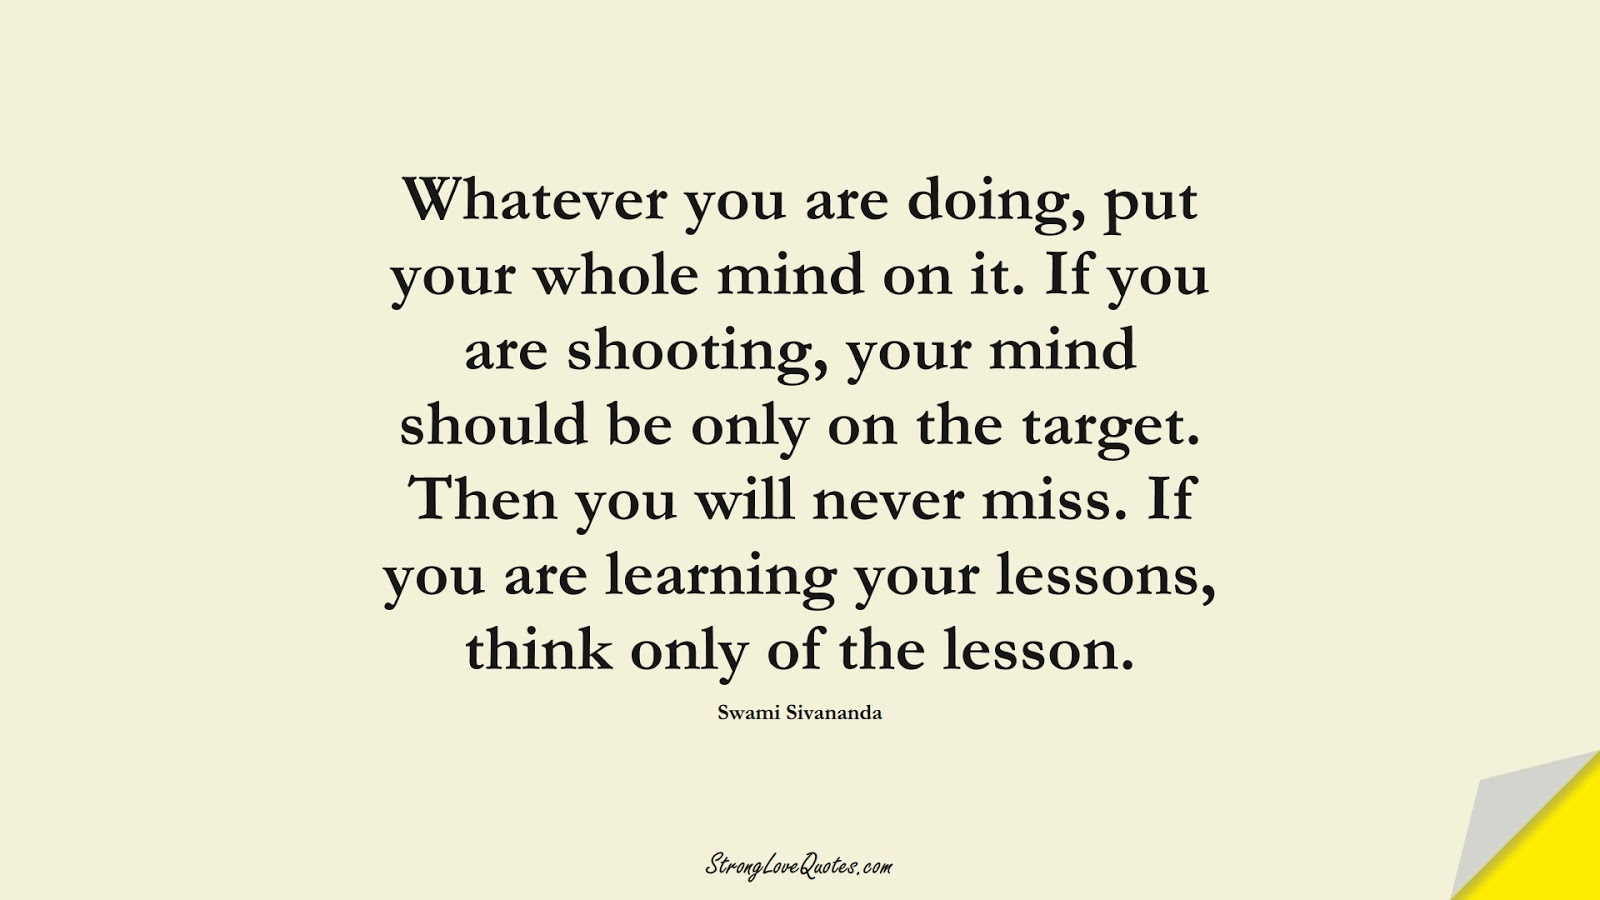 Whatever you are doing, put your whole mind on it. If you are shooting, your mind should be only on the target. Then you will never miss. If you are learning your lessons, think only of the lesson. (Swami Sivananda);  #EducationQuotes